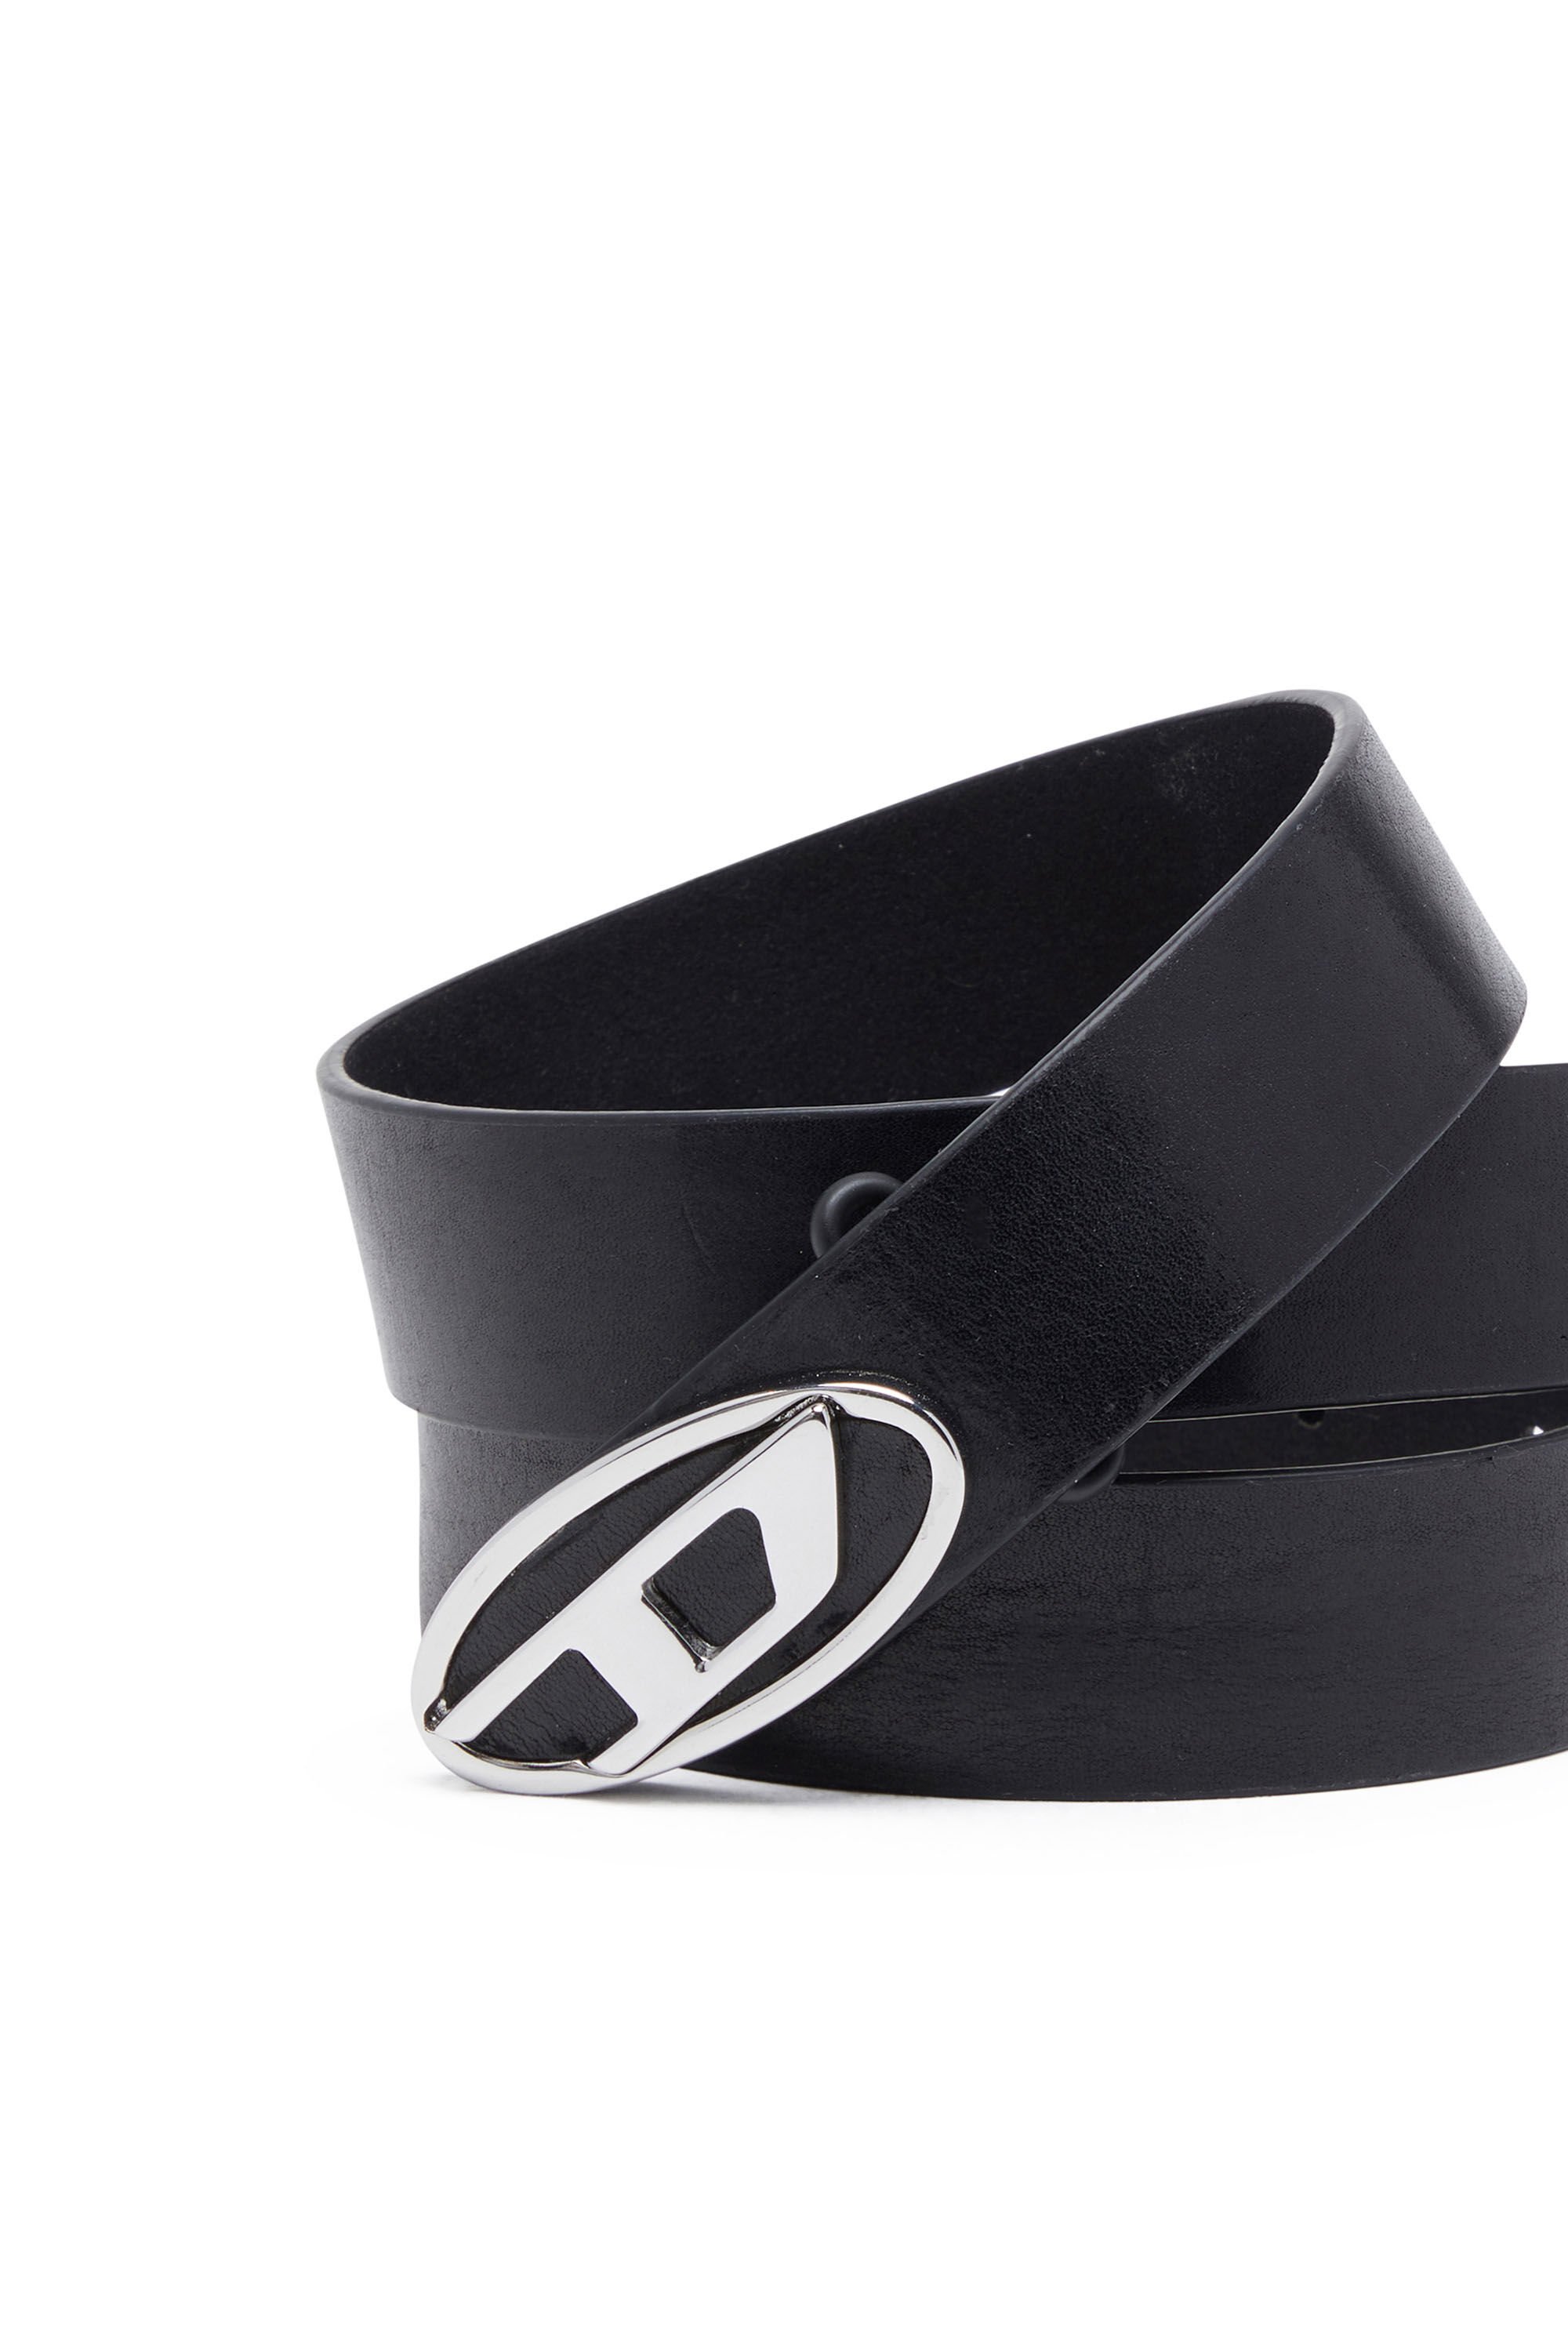 B-1DR-LAYER Reversible leather belt with Oval D logo｜ブラック ...